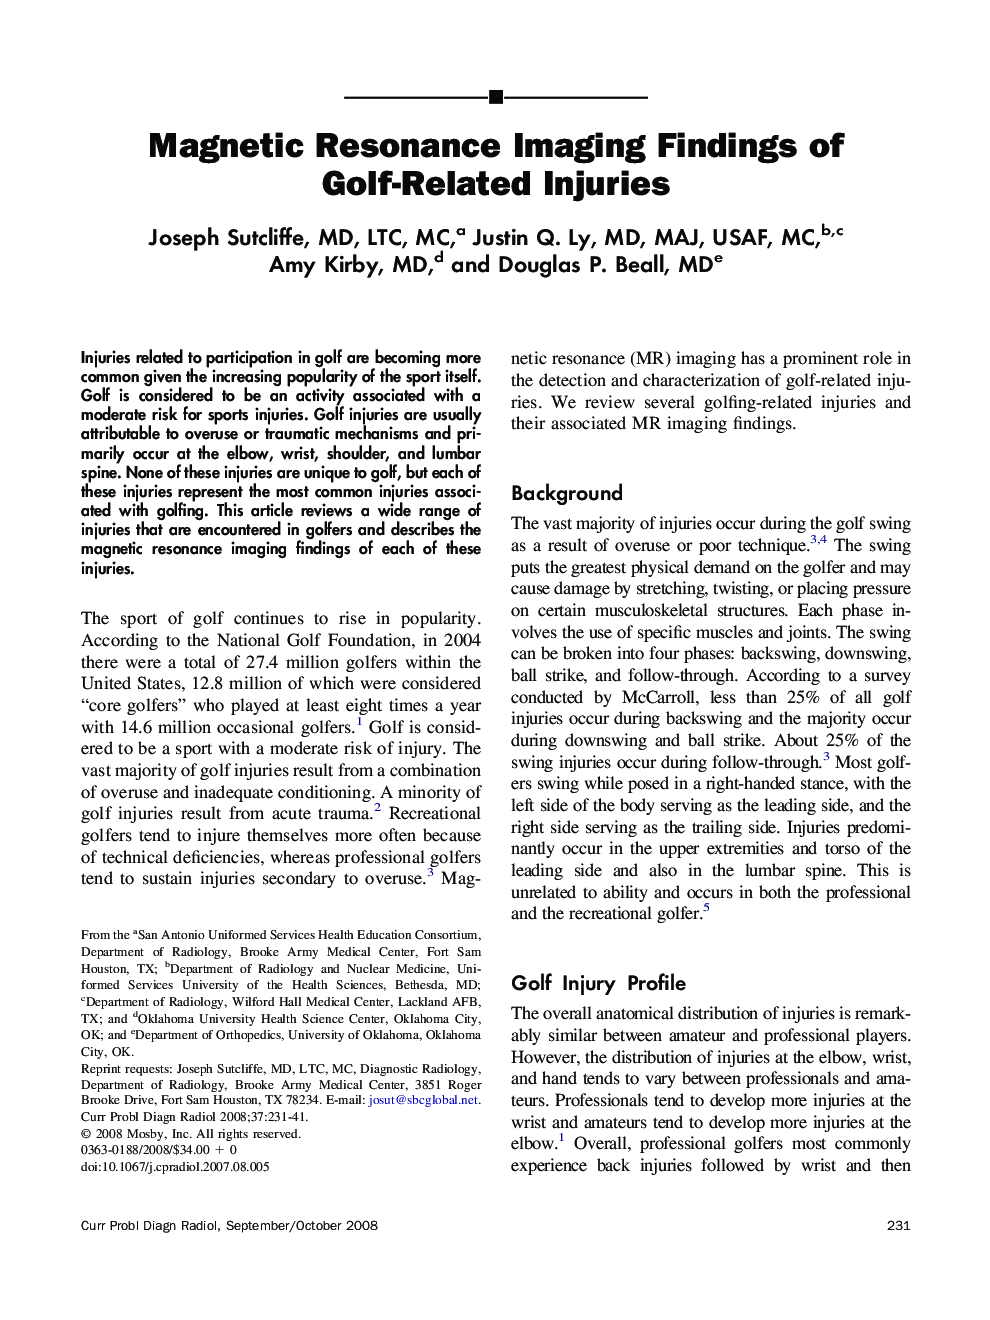 Magnetic Resonance Imaging Findings of Golf-Related Injuries